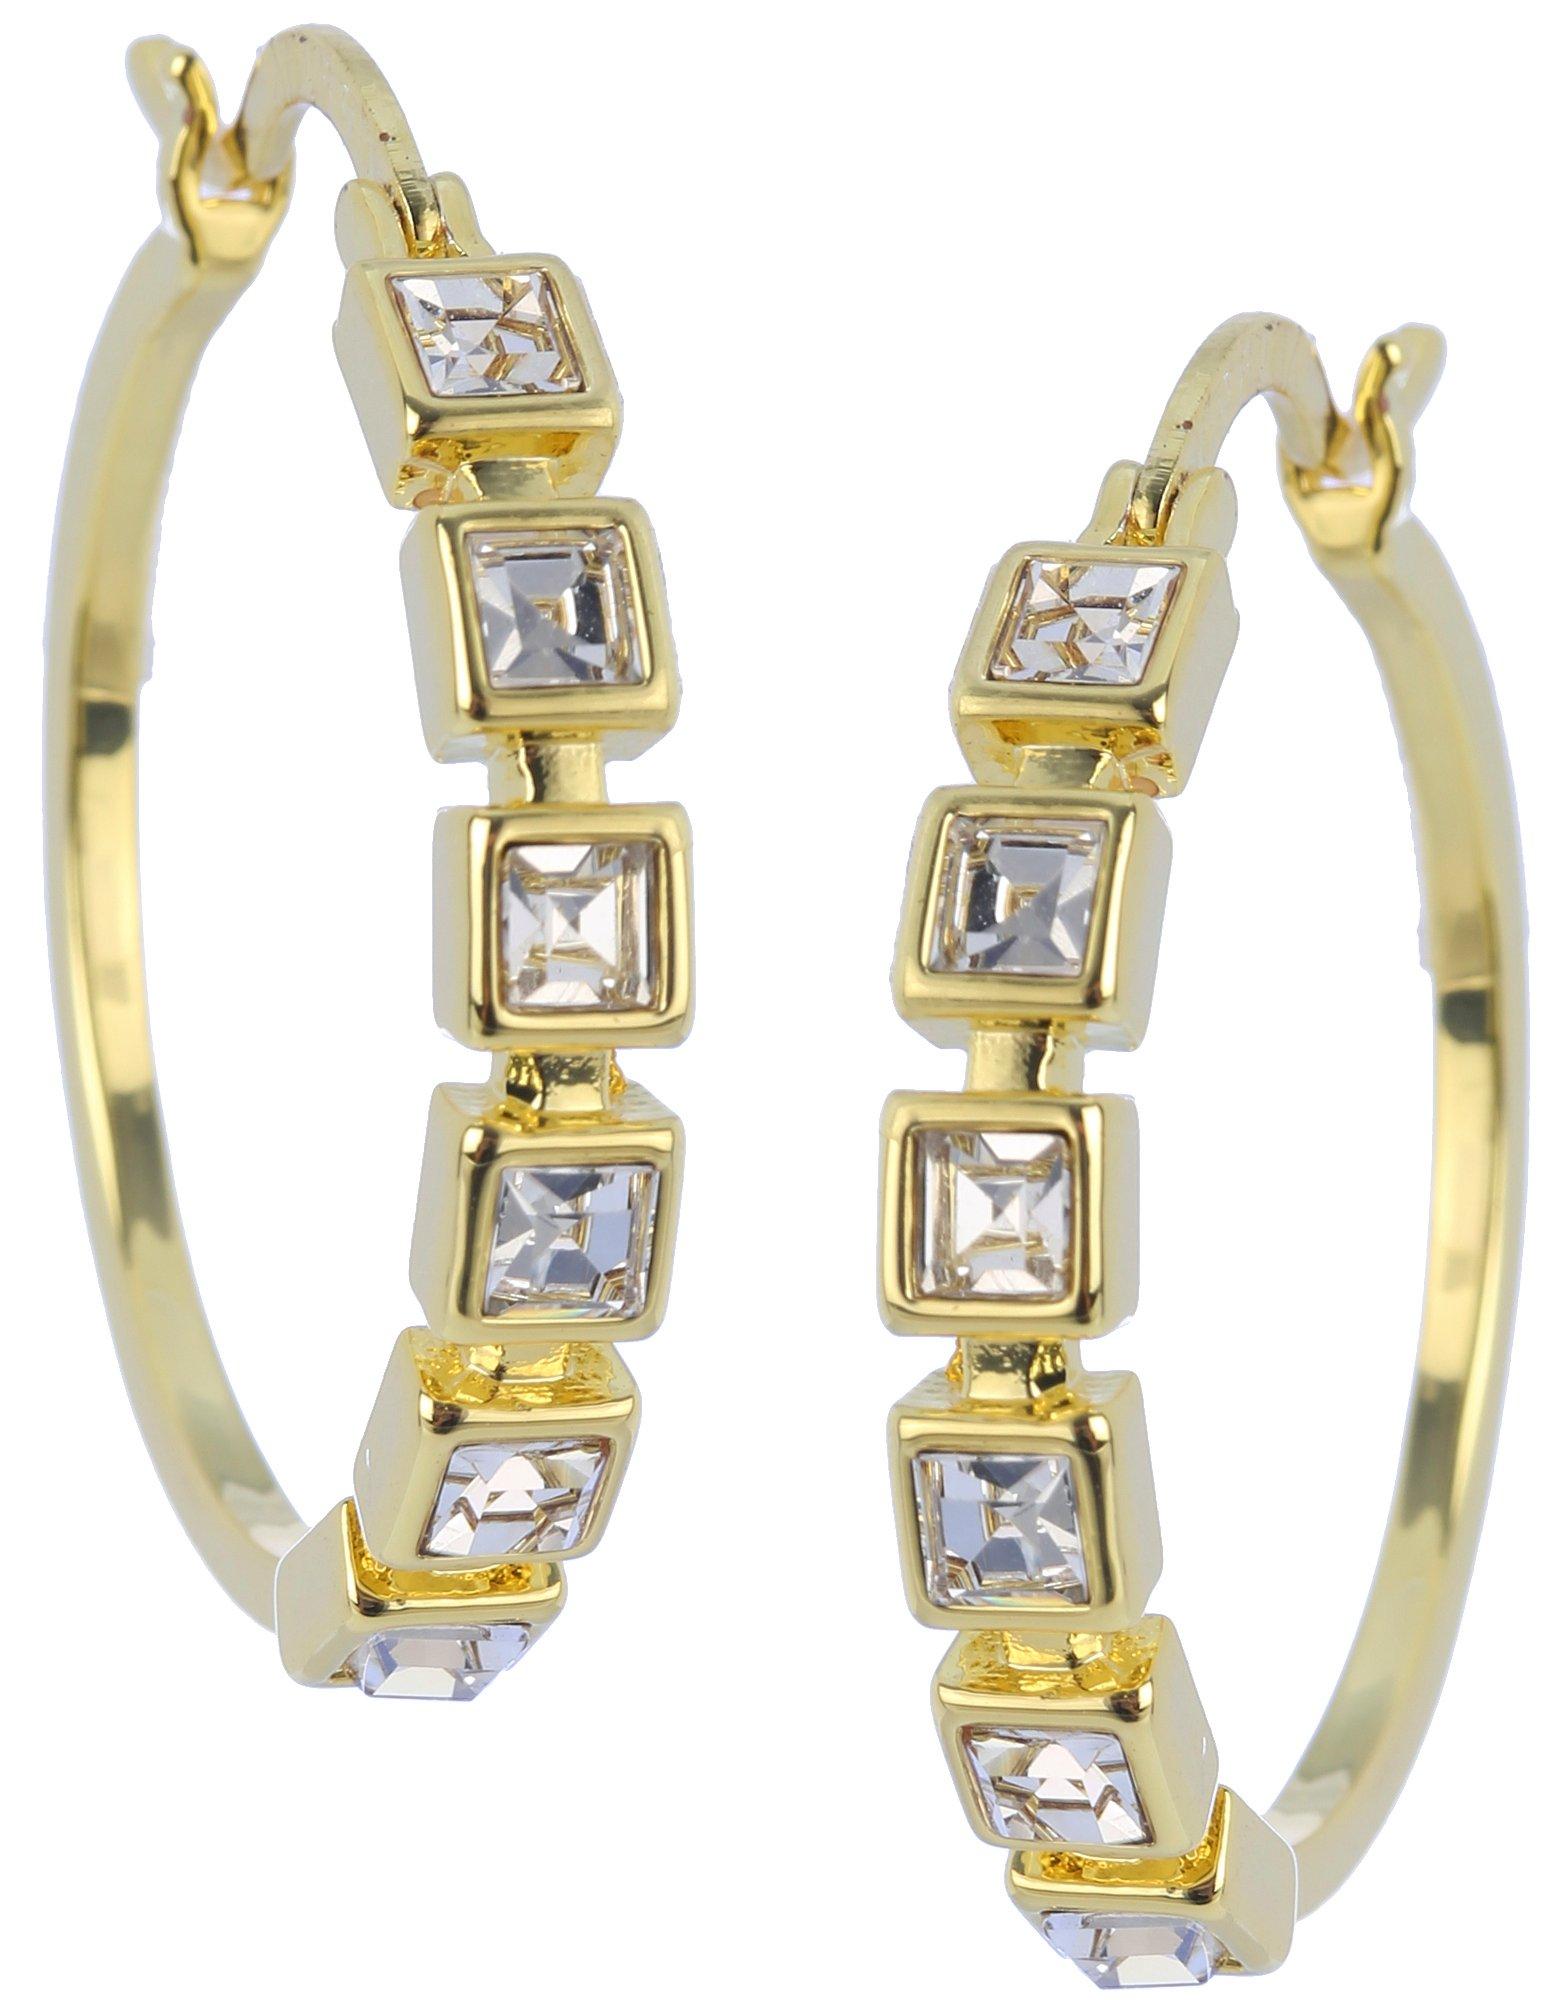 Piper & Taylor 1.25 In. Square Crystal Front Hoop Earrings